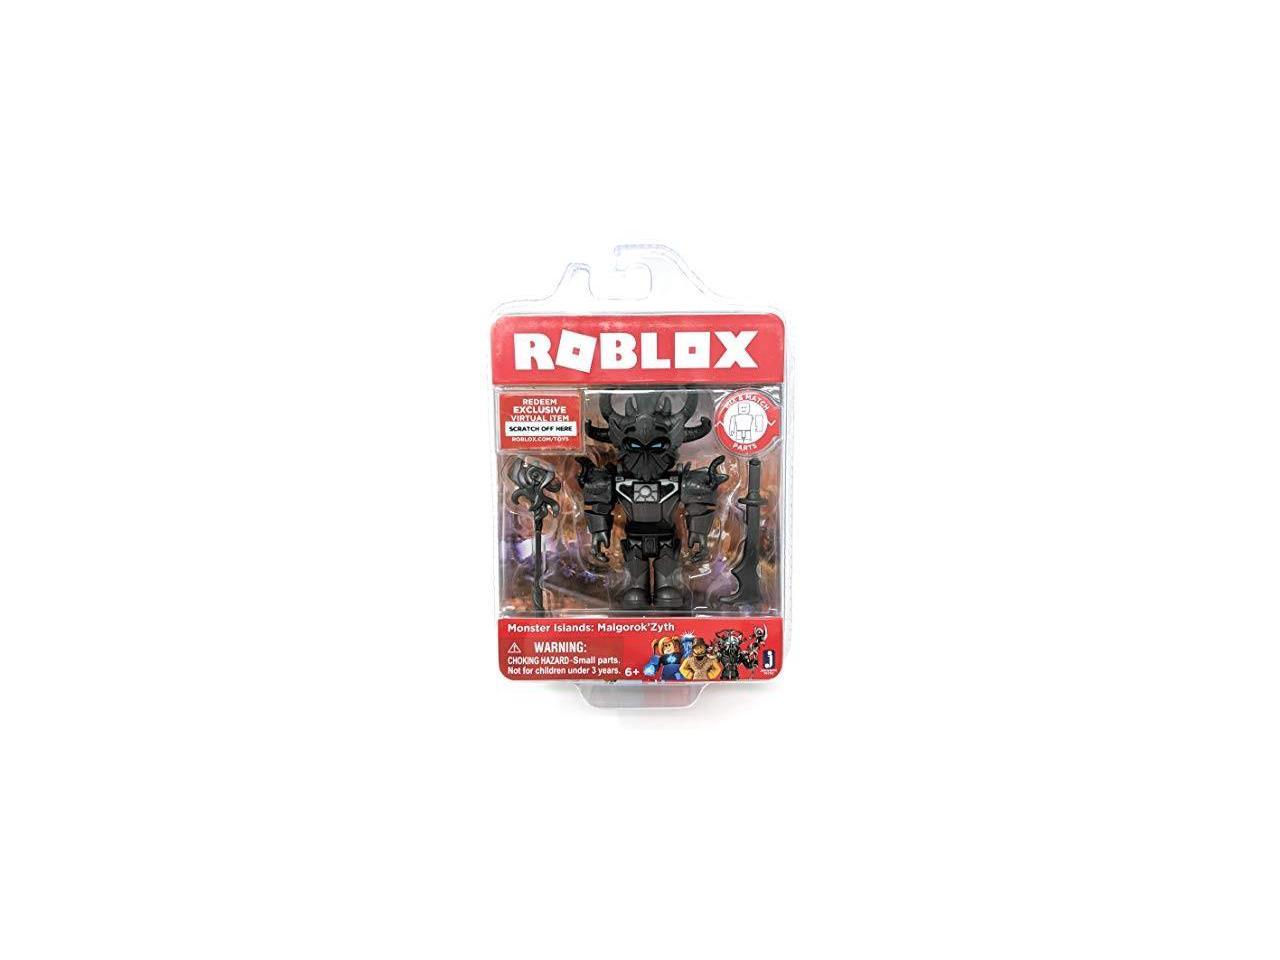 Roblox Monster Islands Malgorok Zyth Single Figure Core Pack With Exclusive Virtual Item Code Newegg Com - roblox assassin 2018 ice lord